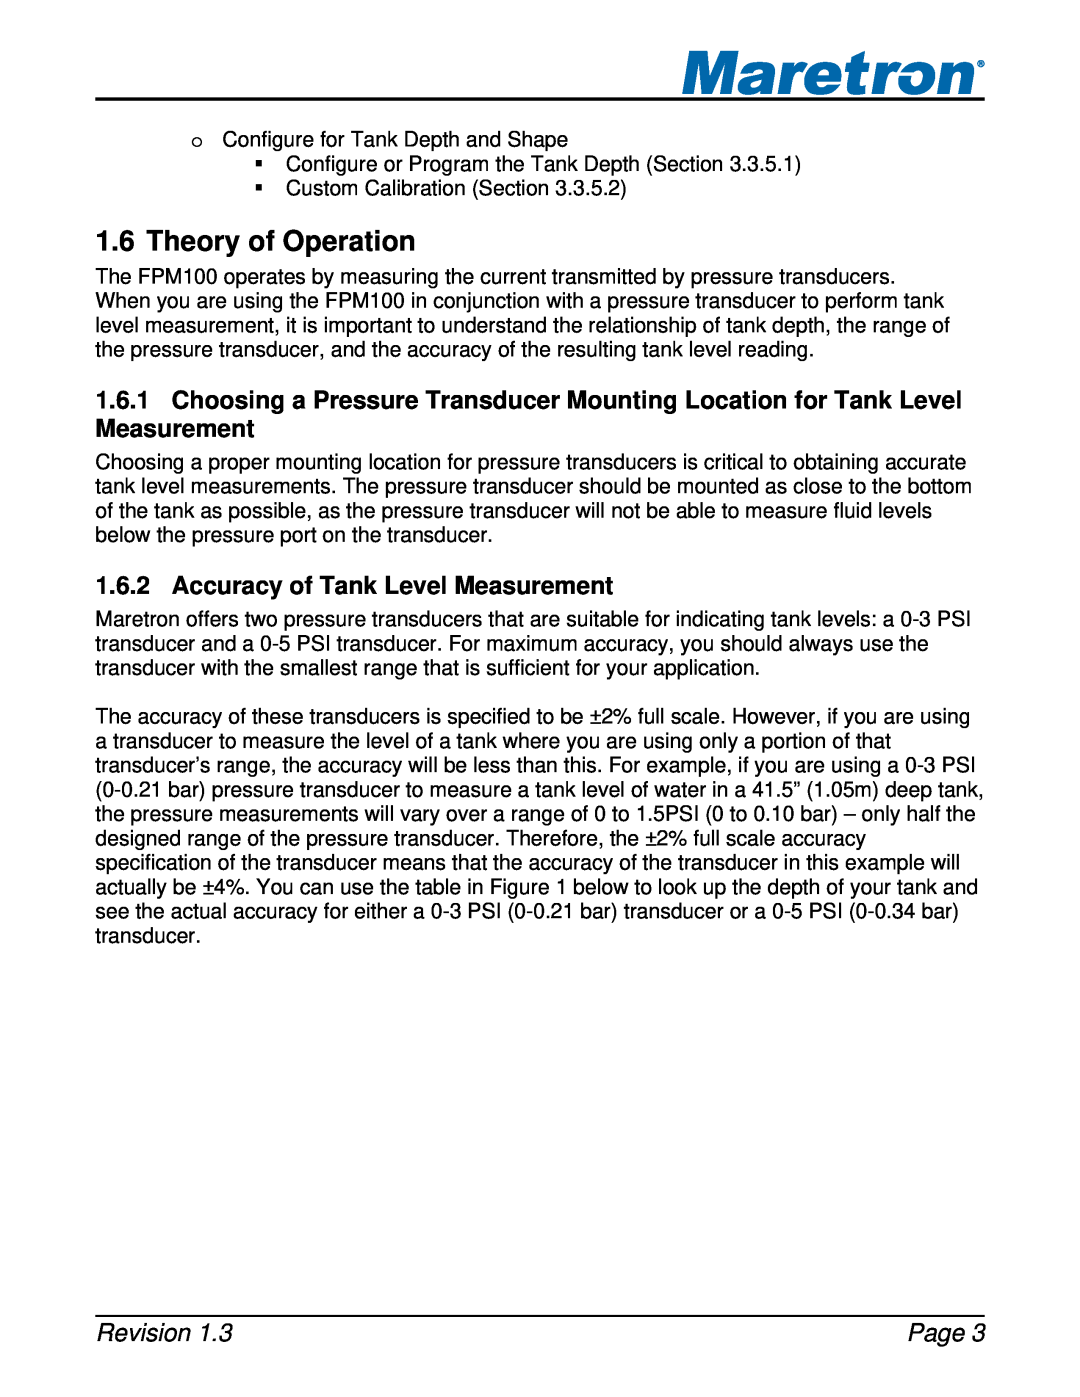 Maretron FPM100 user manual Theory of Operation, Accuracy of Tank Level Measurement, Revision, Page 